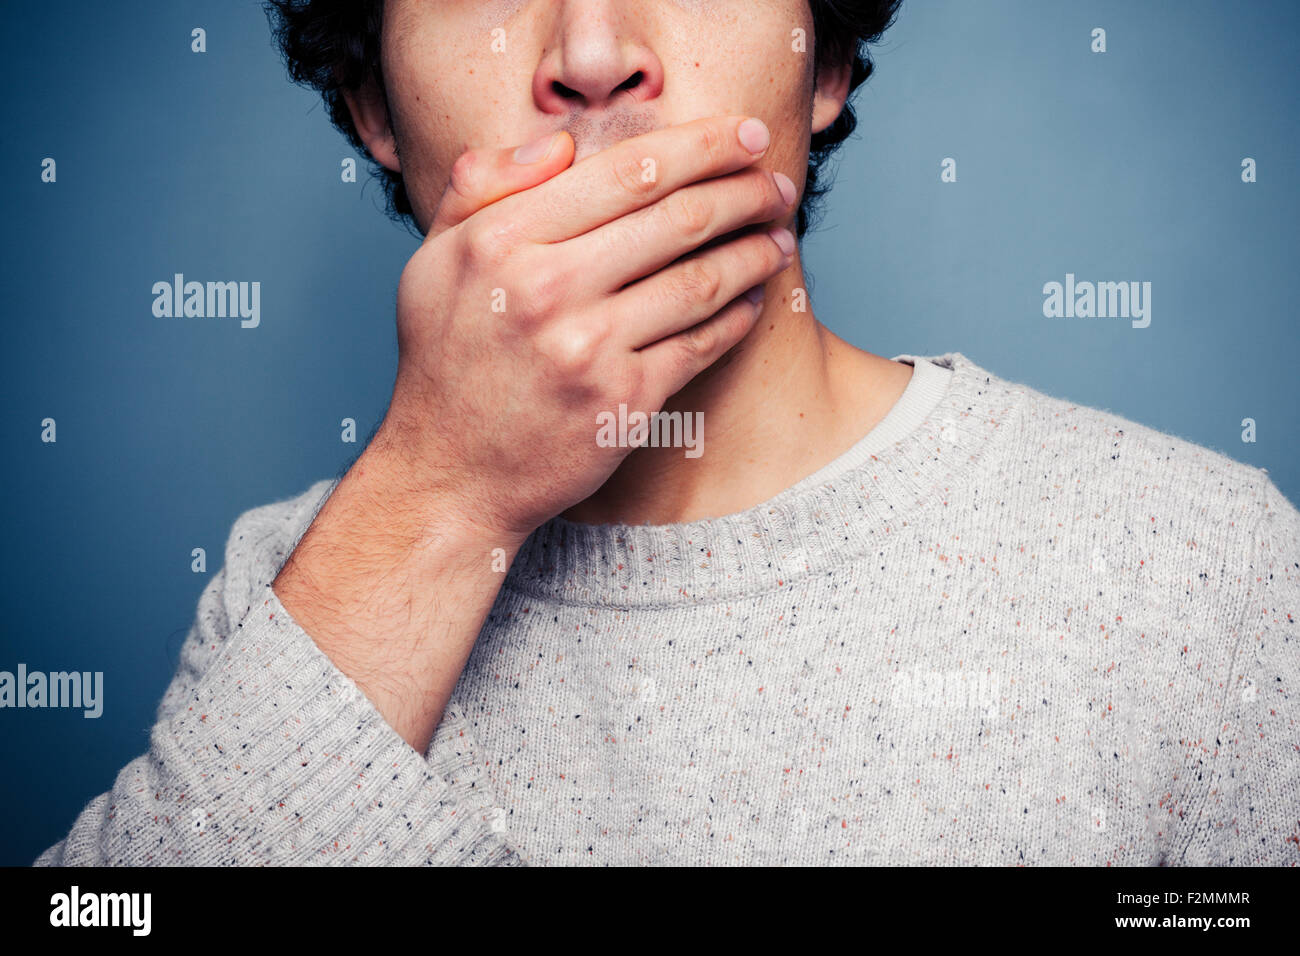 Young man covering mouth in shock Stock Photo